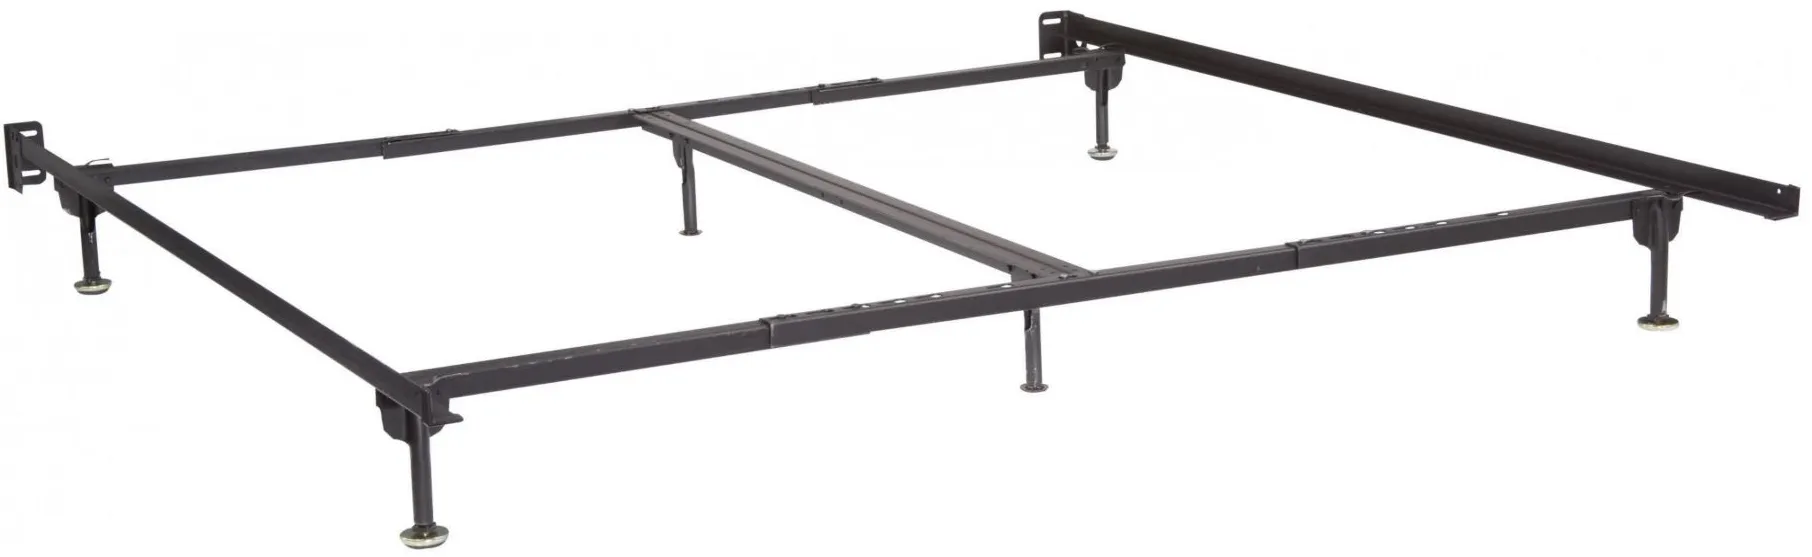 Adjustable Bed Frame w/ Glides - Queen/King by Glideaway.